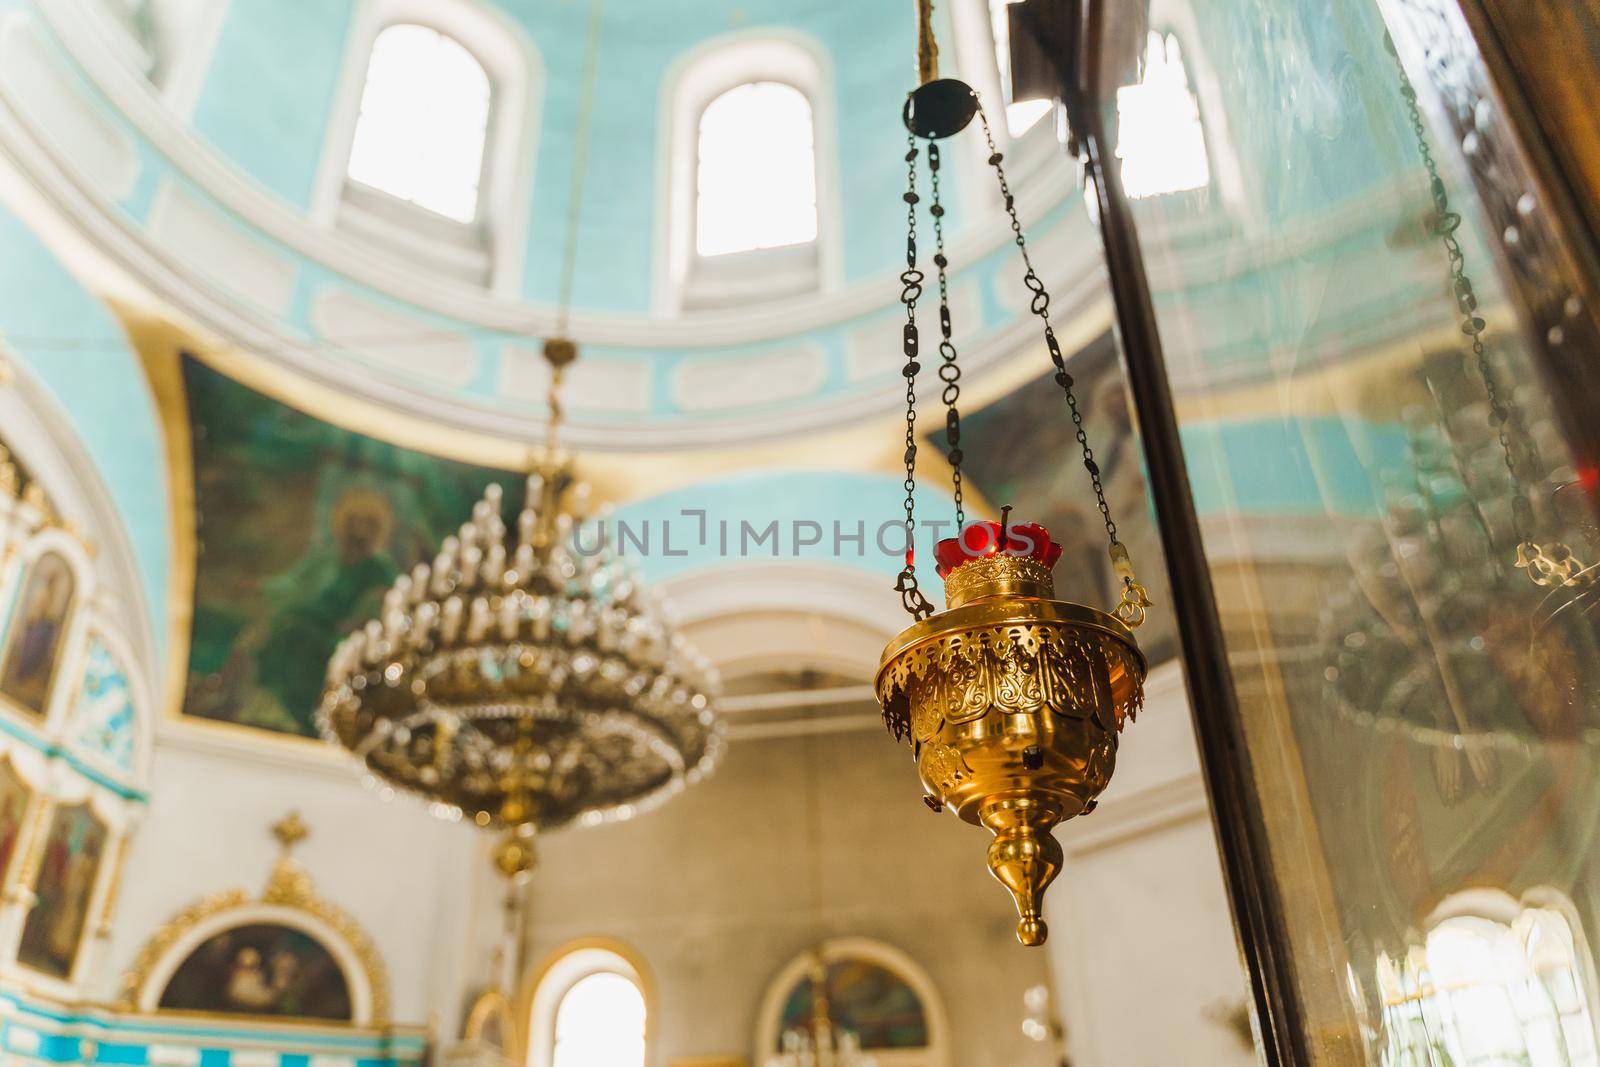 Gold censer with a red candlestick in the church. Big chandelier on the background. Church interior